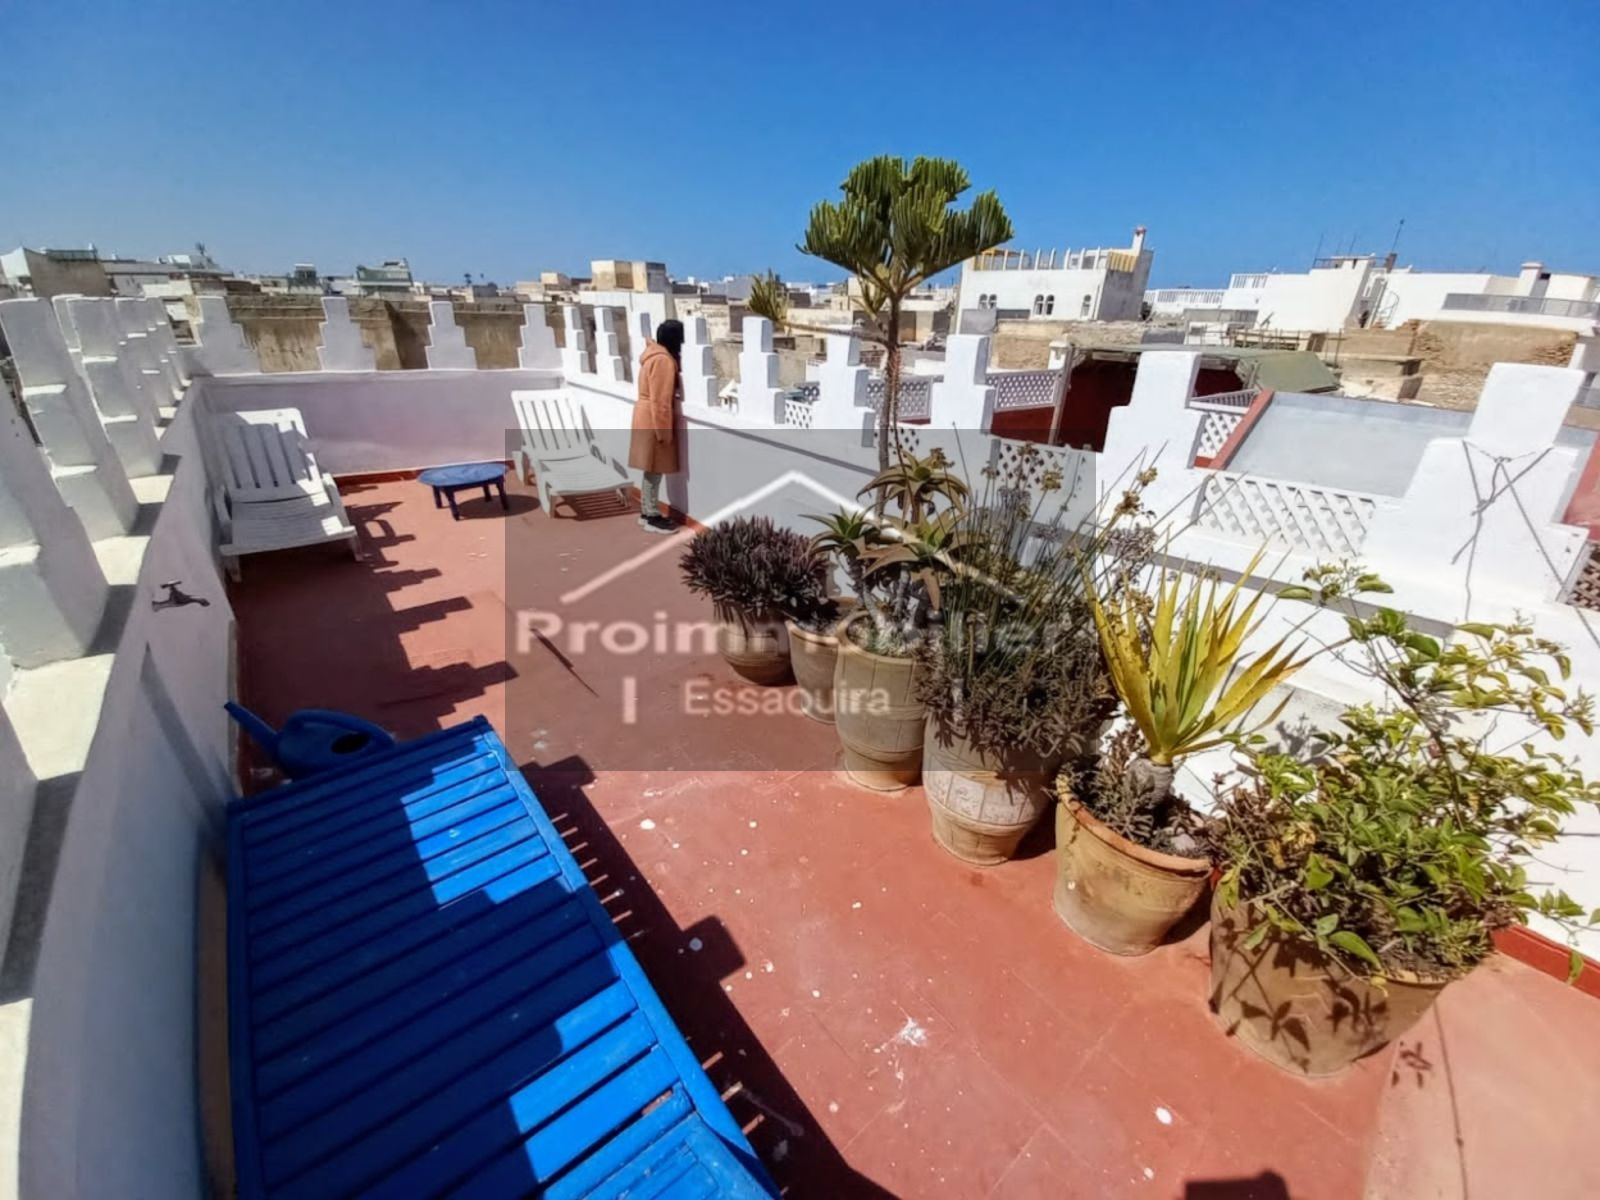 22-06-08-VR charming riad for sale in Essaouira two private terraces